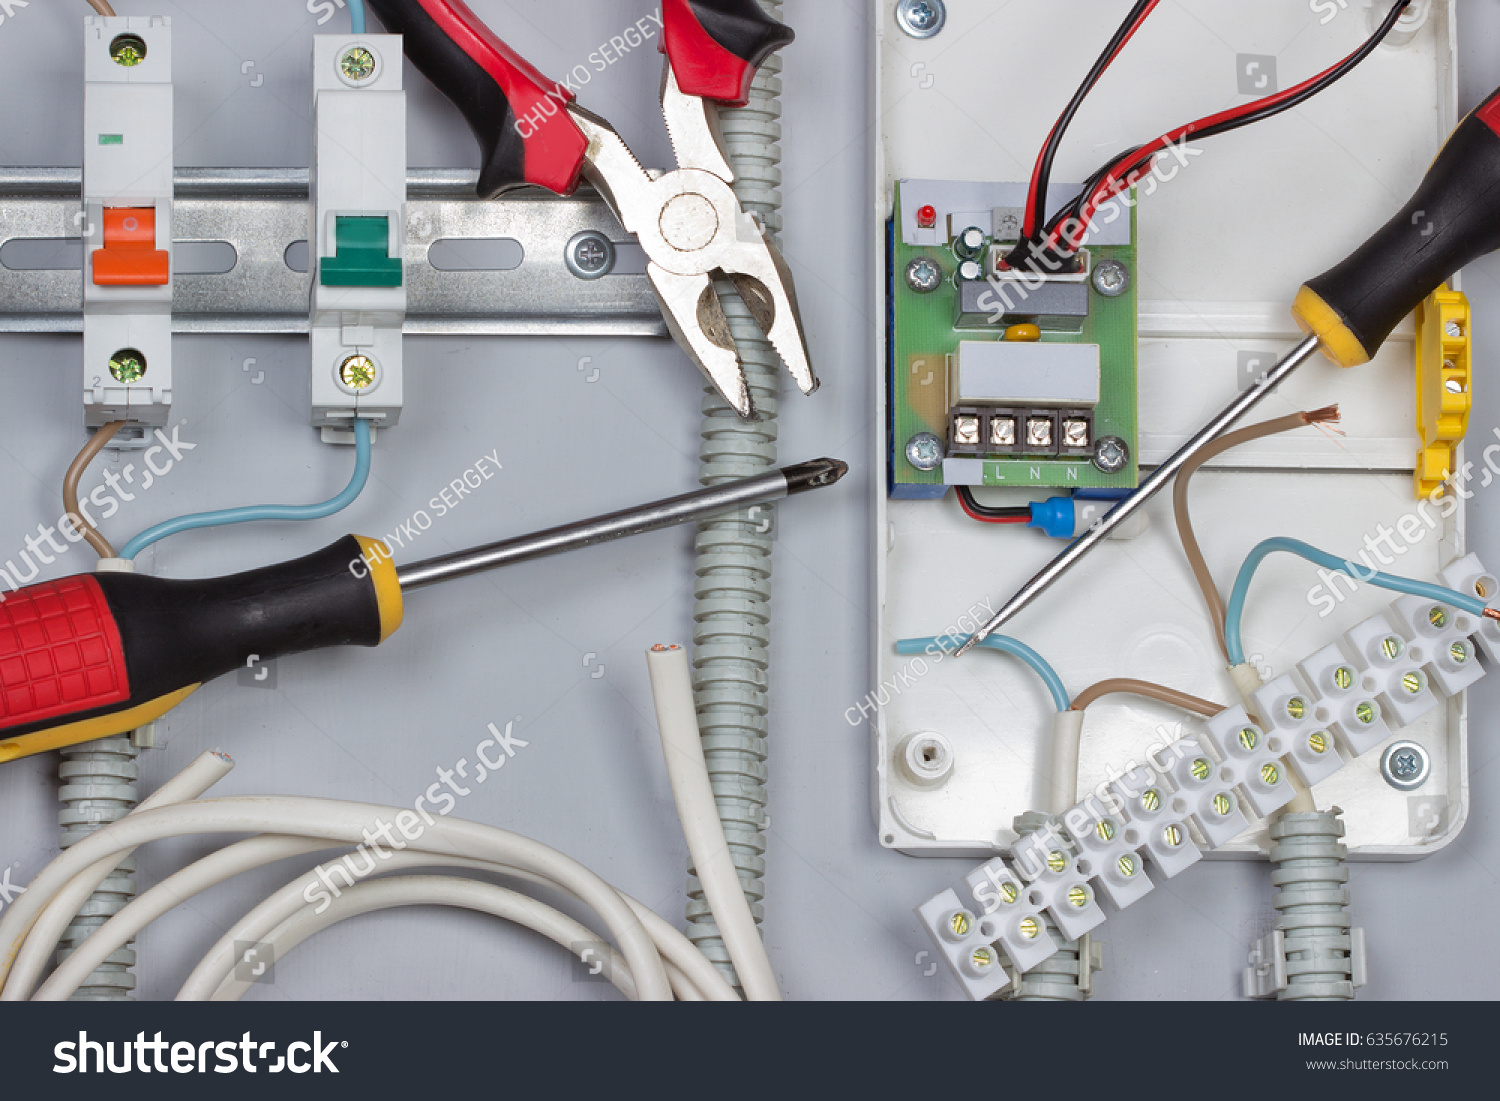  Installation of electrical devices, wires in distribution board #635676215